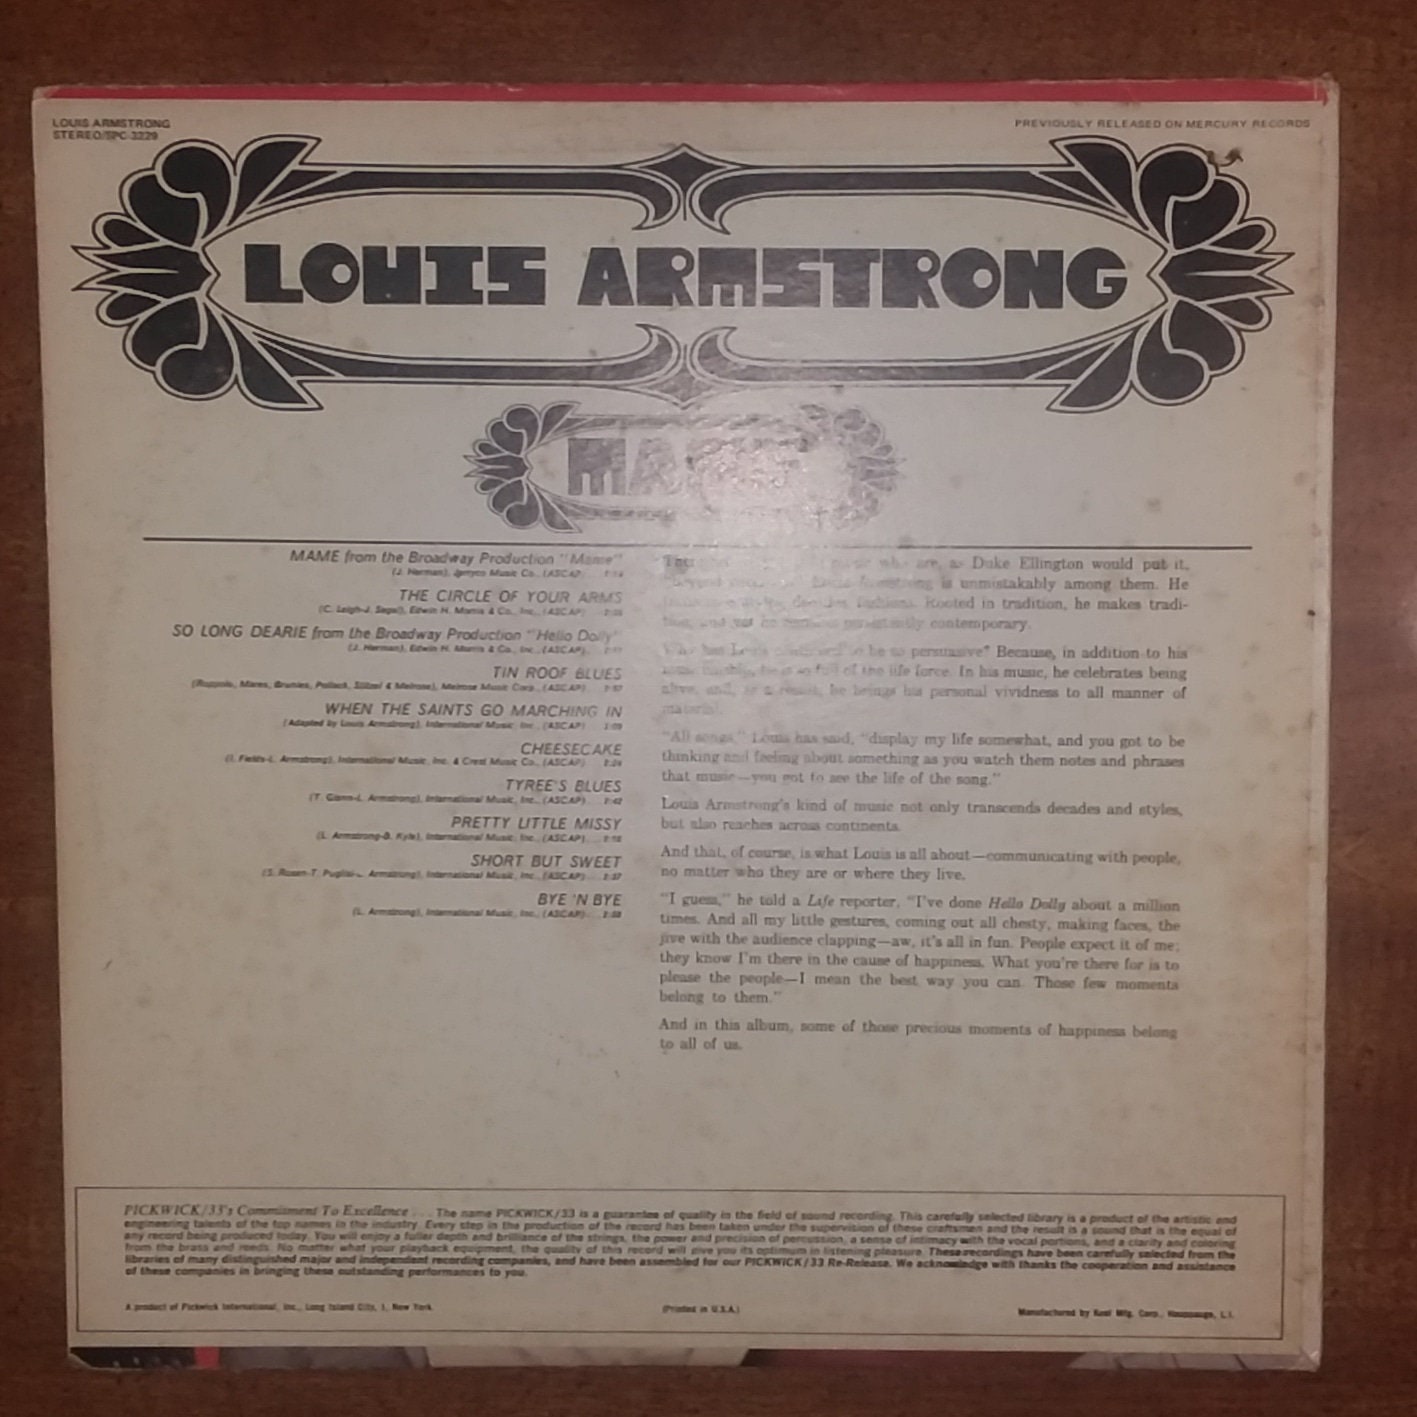 Louis Armstrong And His All-Stars - Ambassador Satch / [CL 840